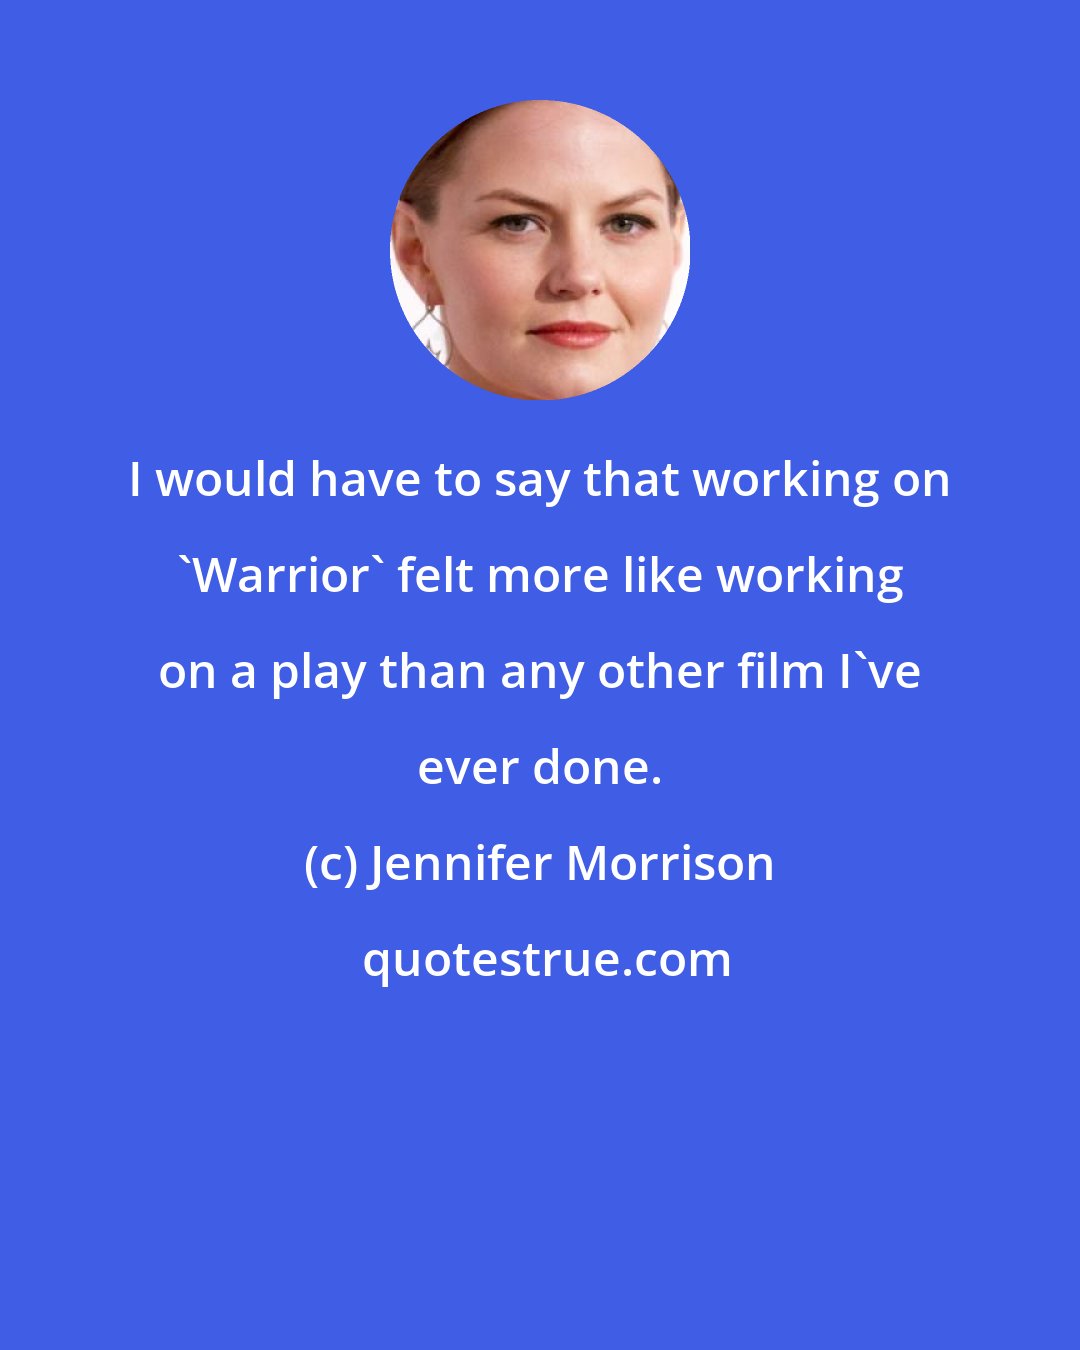 Jennifer Morrison: I would have to say that working on 'Warrior' felt more like working on a play than any other film I've ever done.